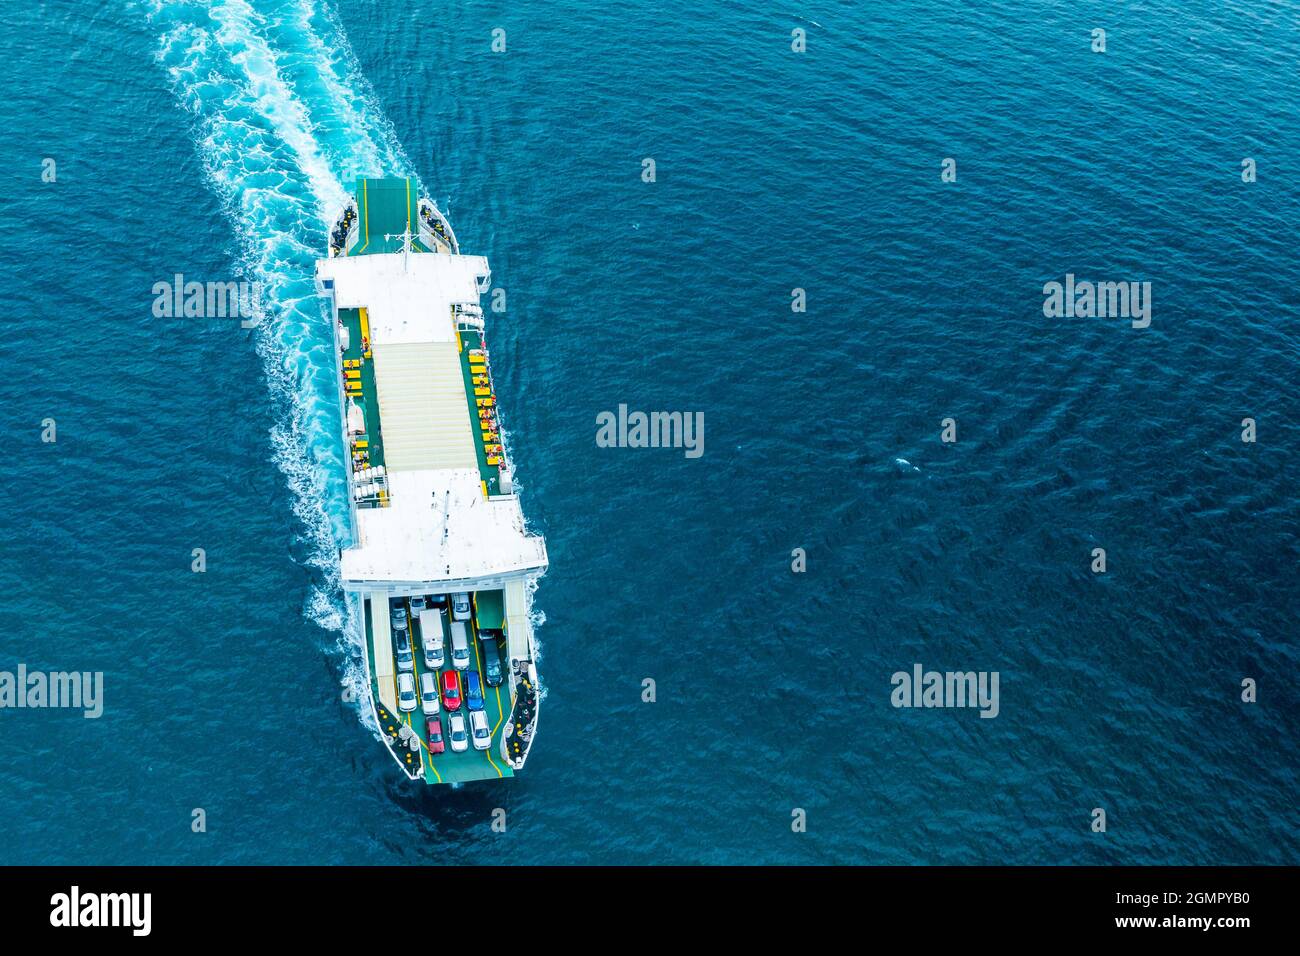 Top view on the ferry boat for car transportation on the blue water of the Adriatic sea. Automobiles on the deck.  Stock Photo